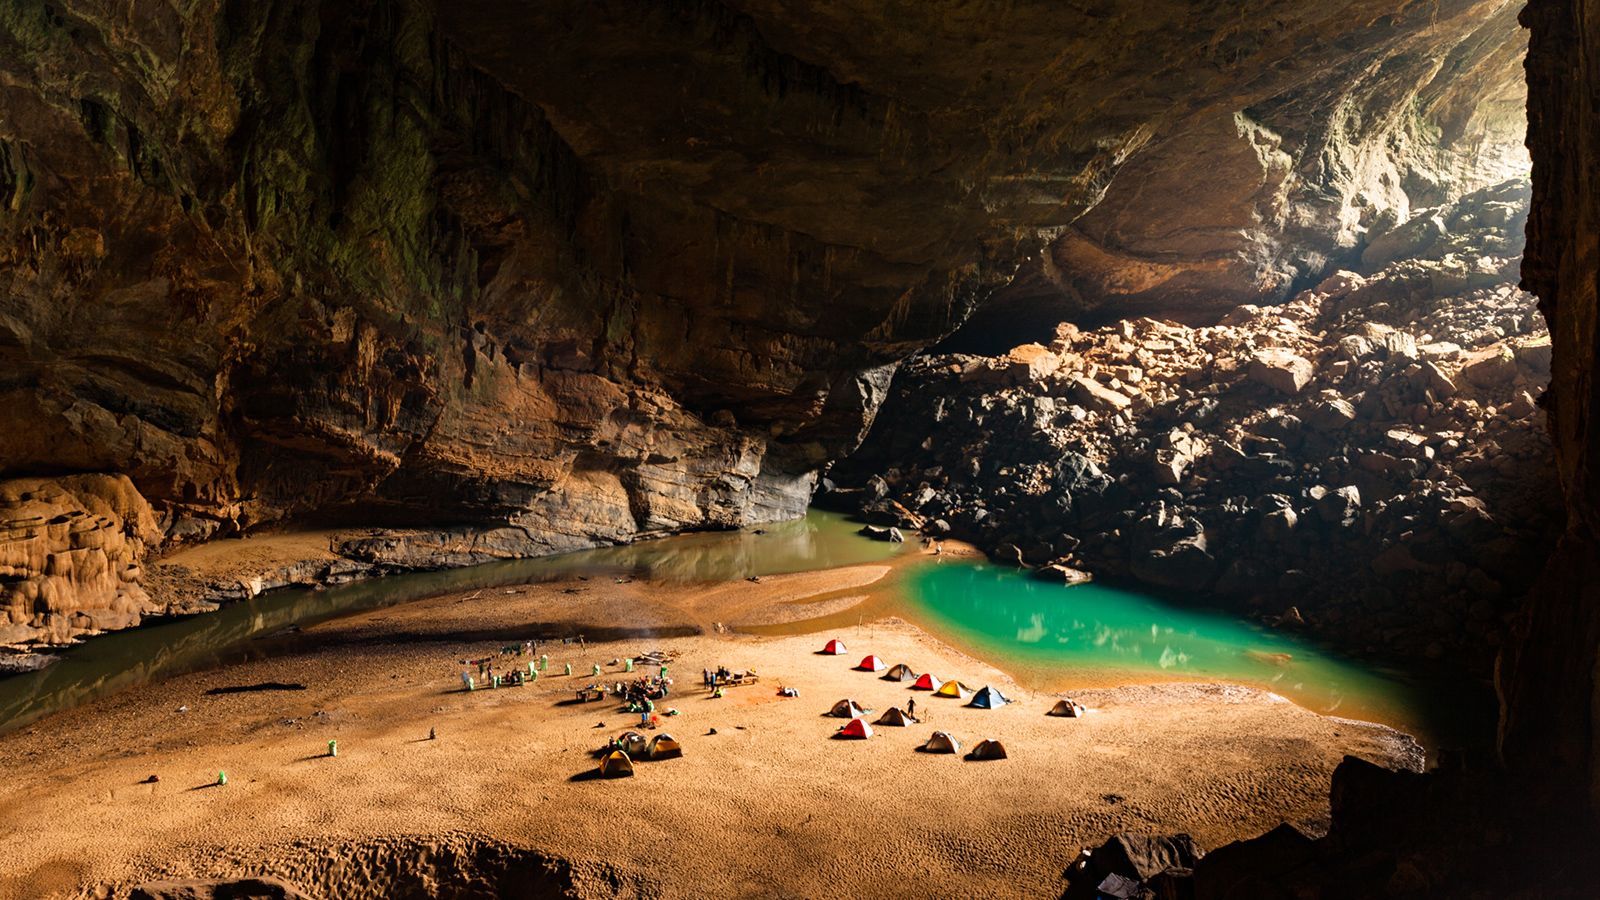 See world's largest cave, Hang Son Doong, in Vietnam